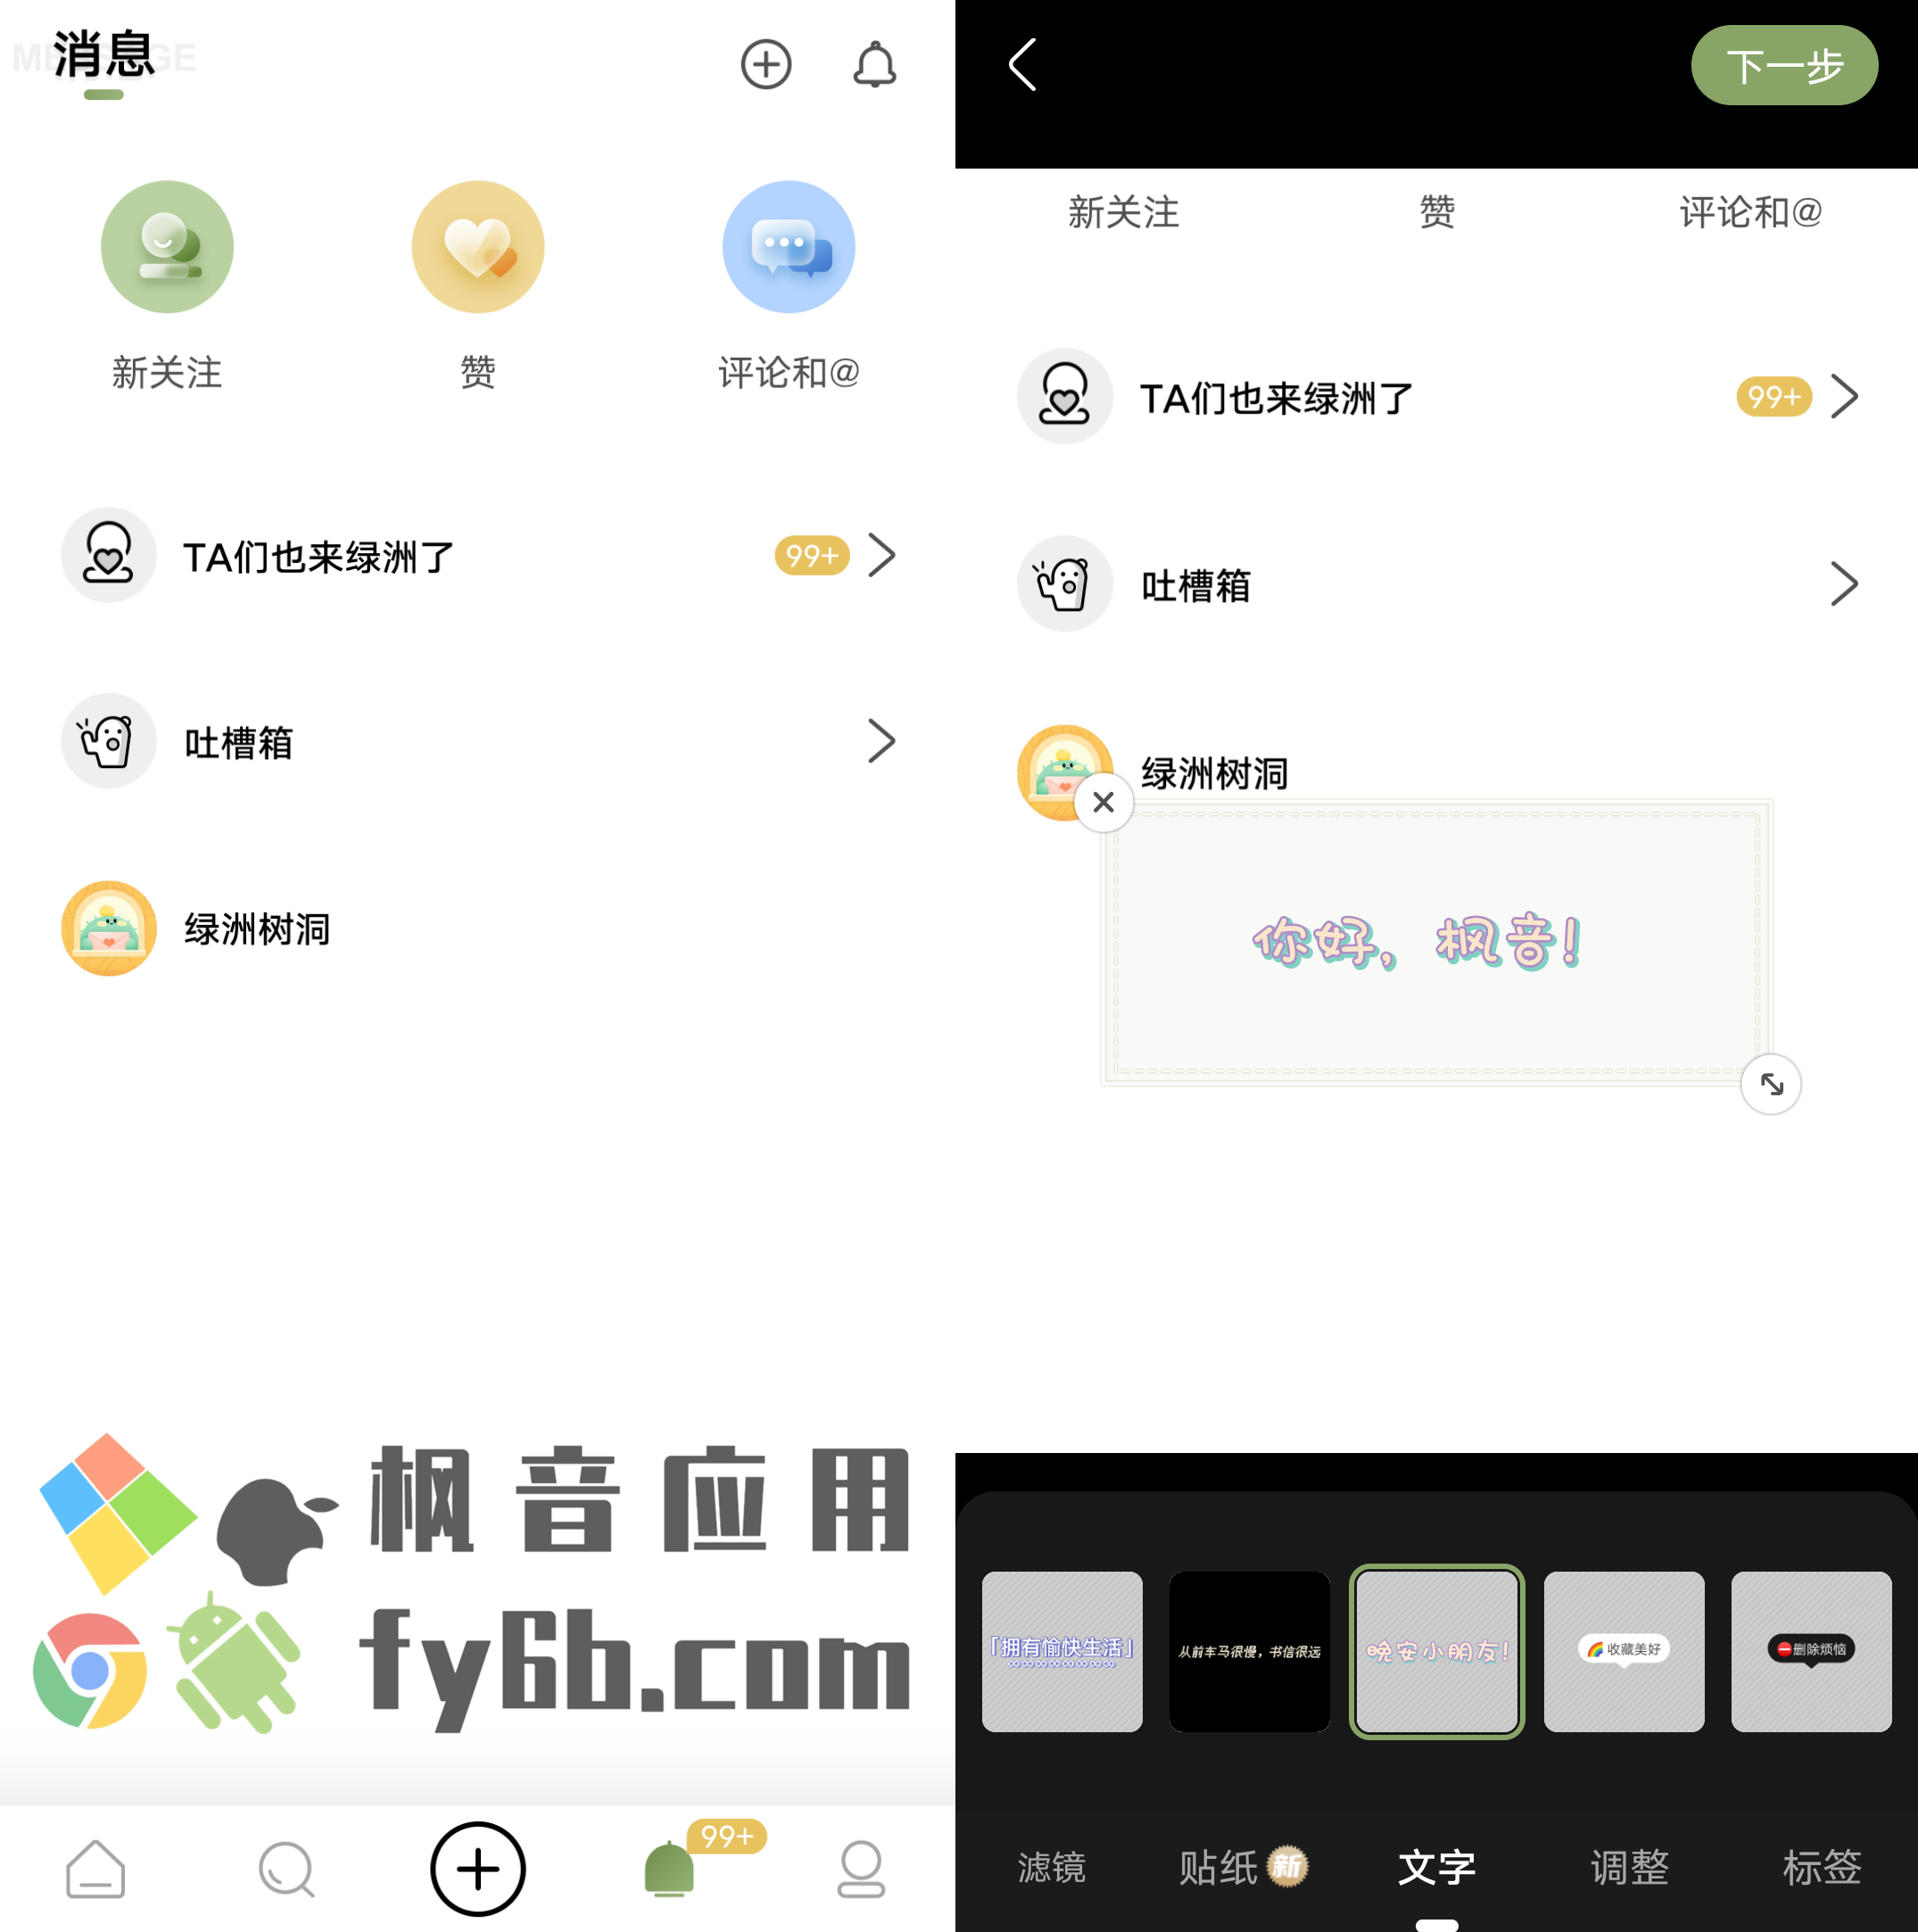 Android 绿洲_4.0.6